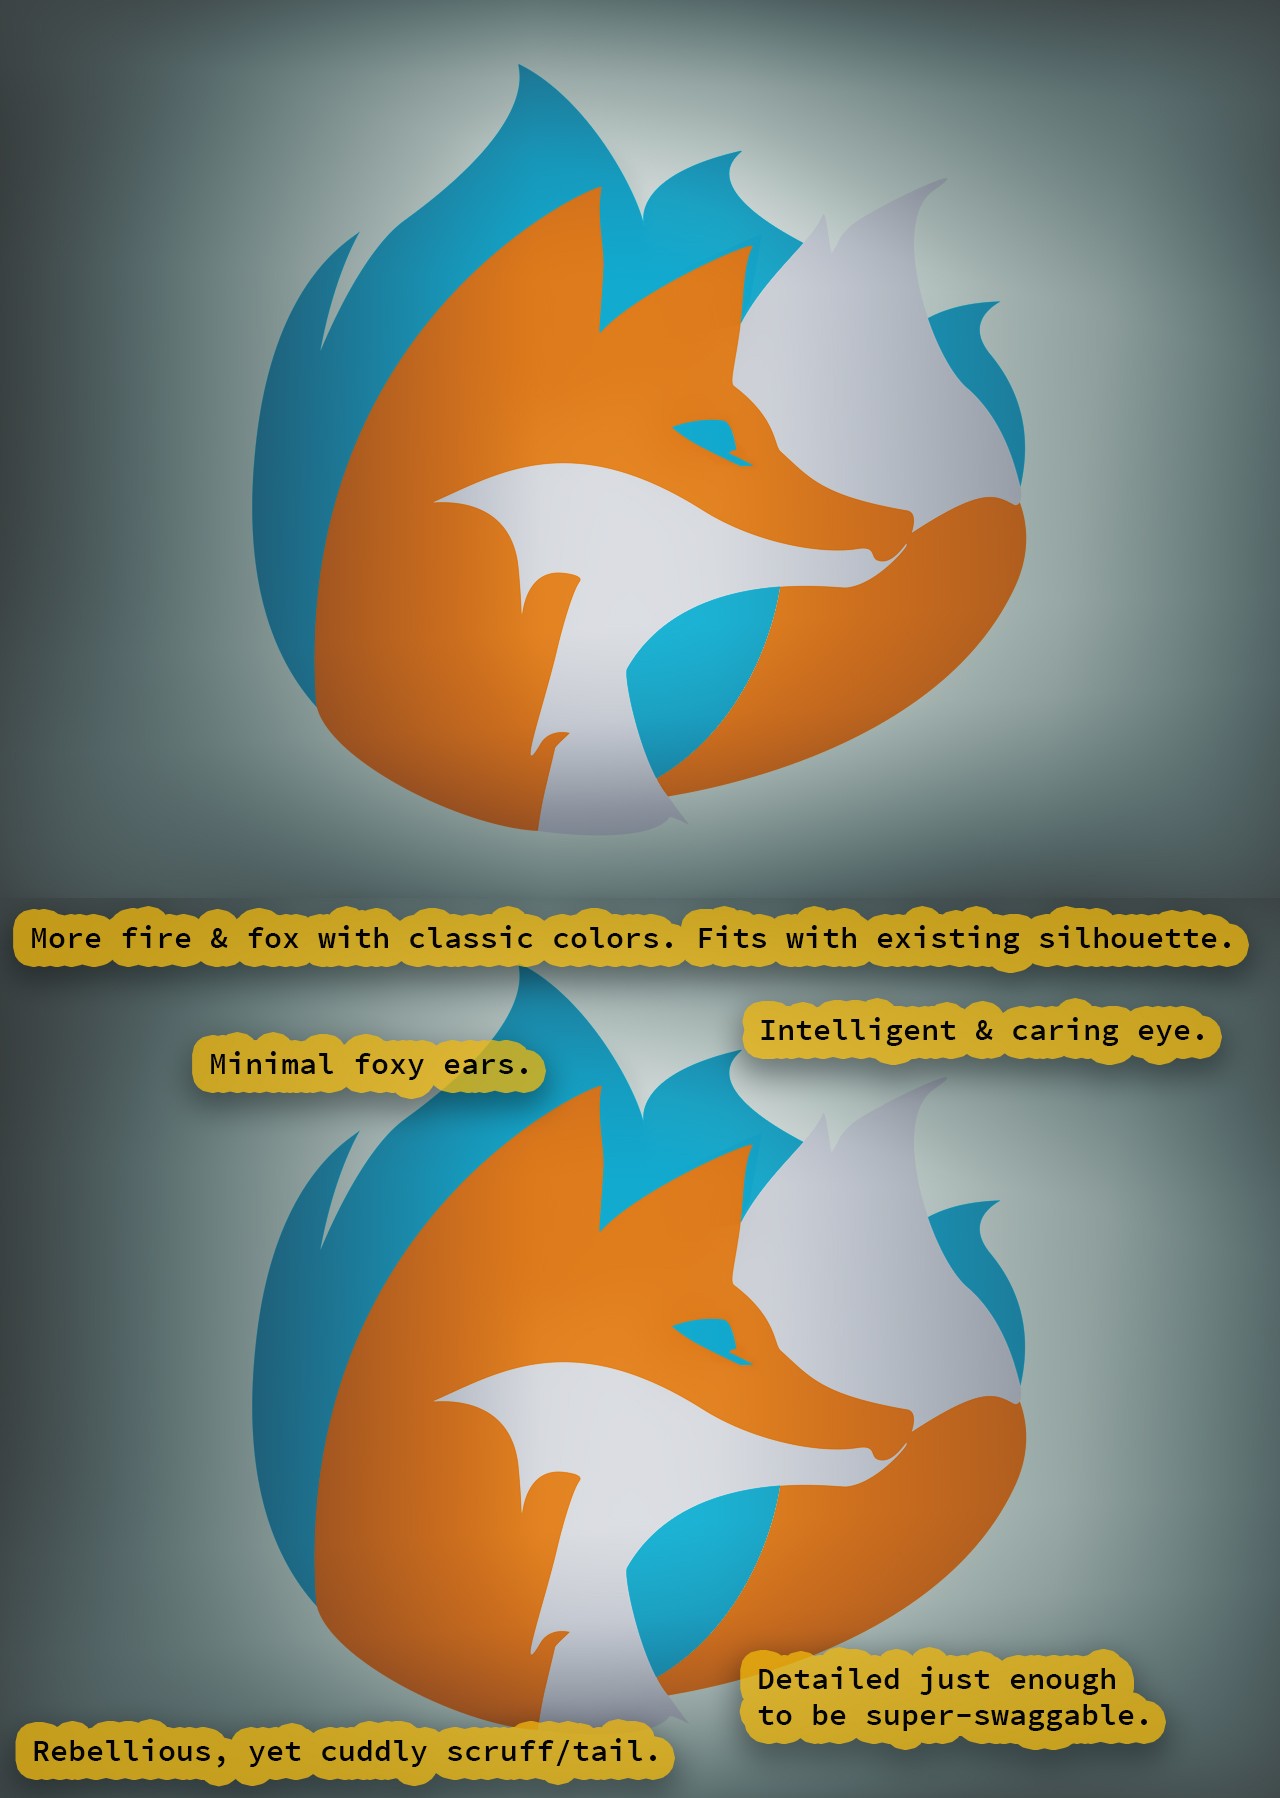 New Firefox flat logo and icon.